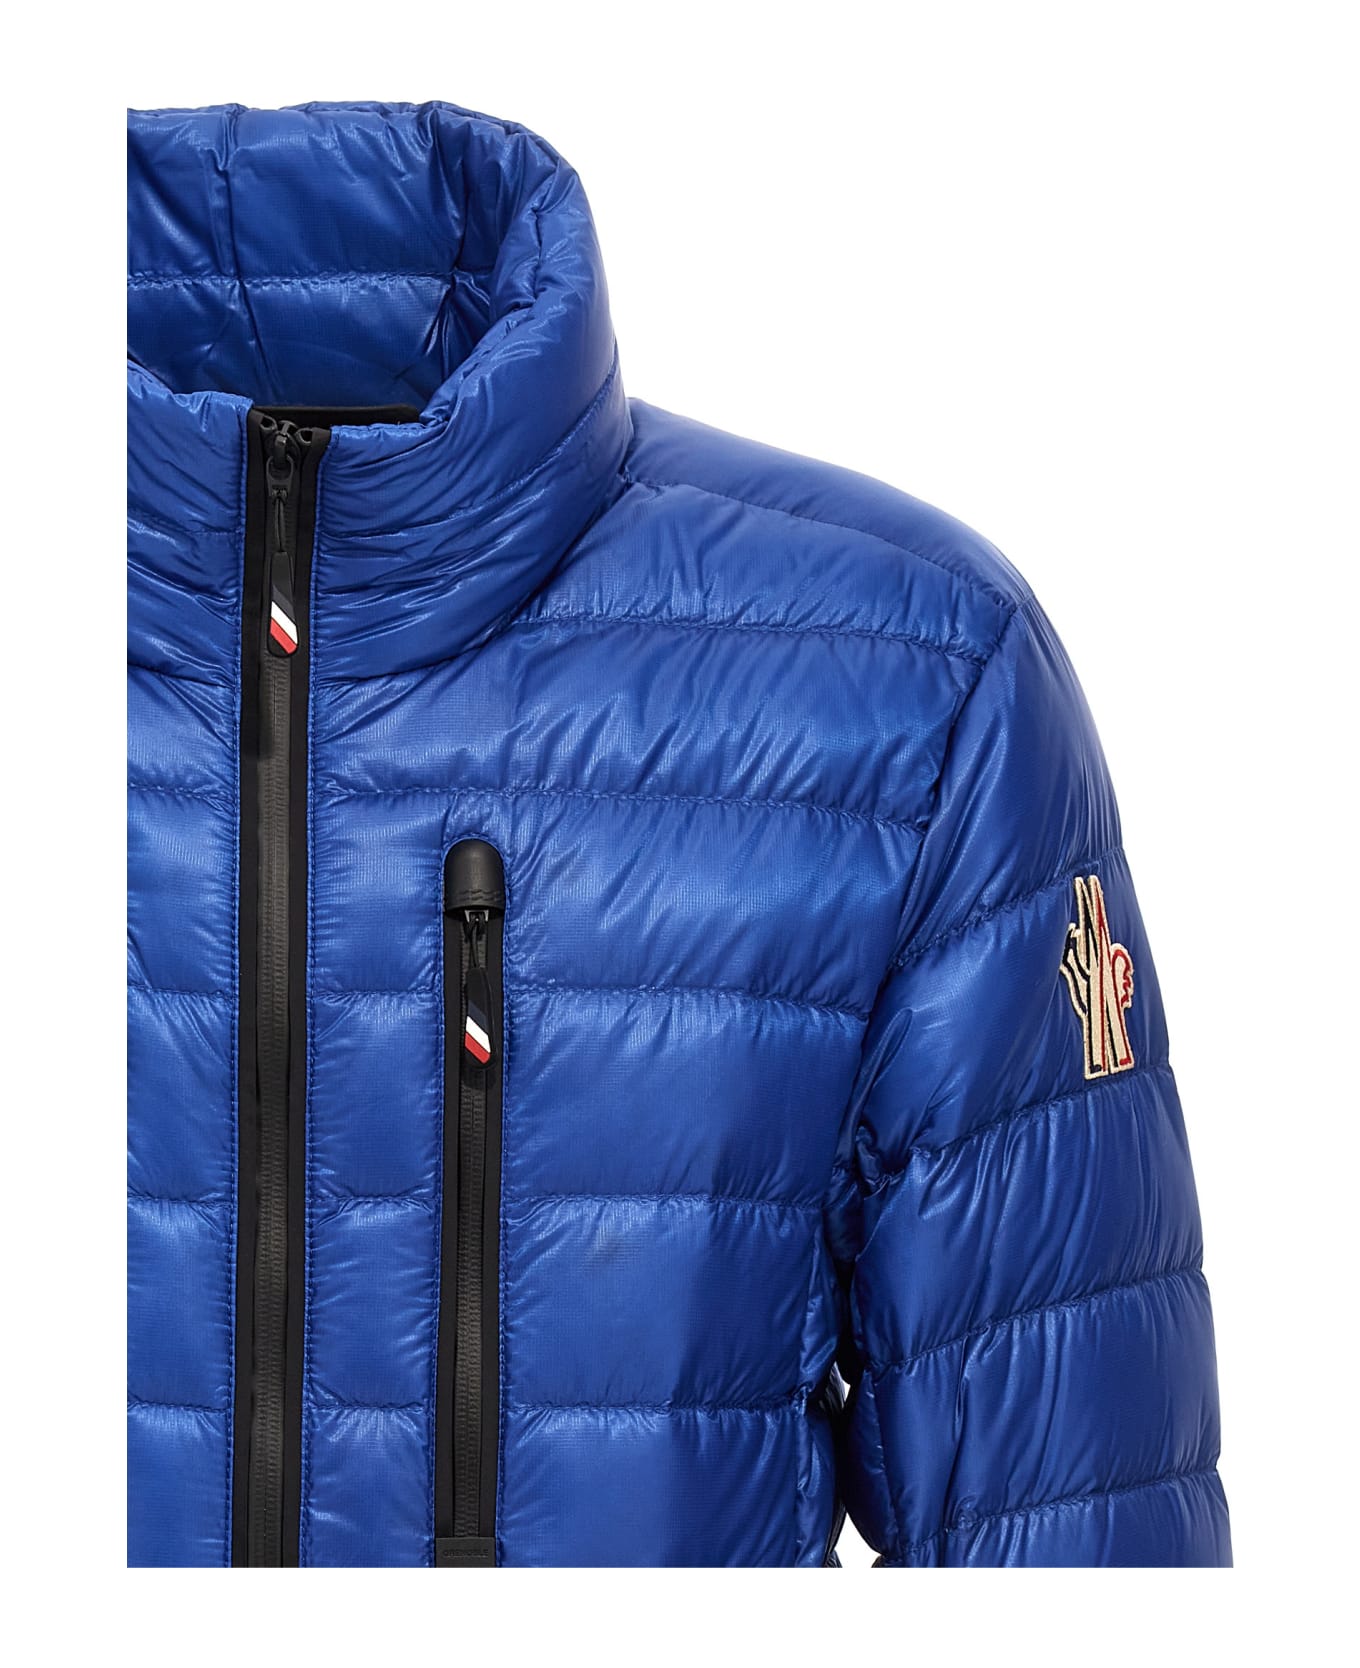 Moncler Grenoble 'hers' Down Jacket - Blue